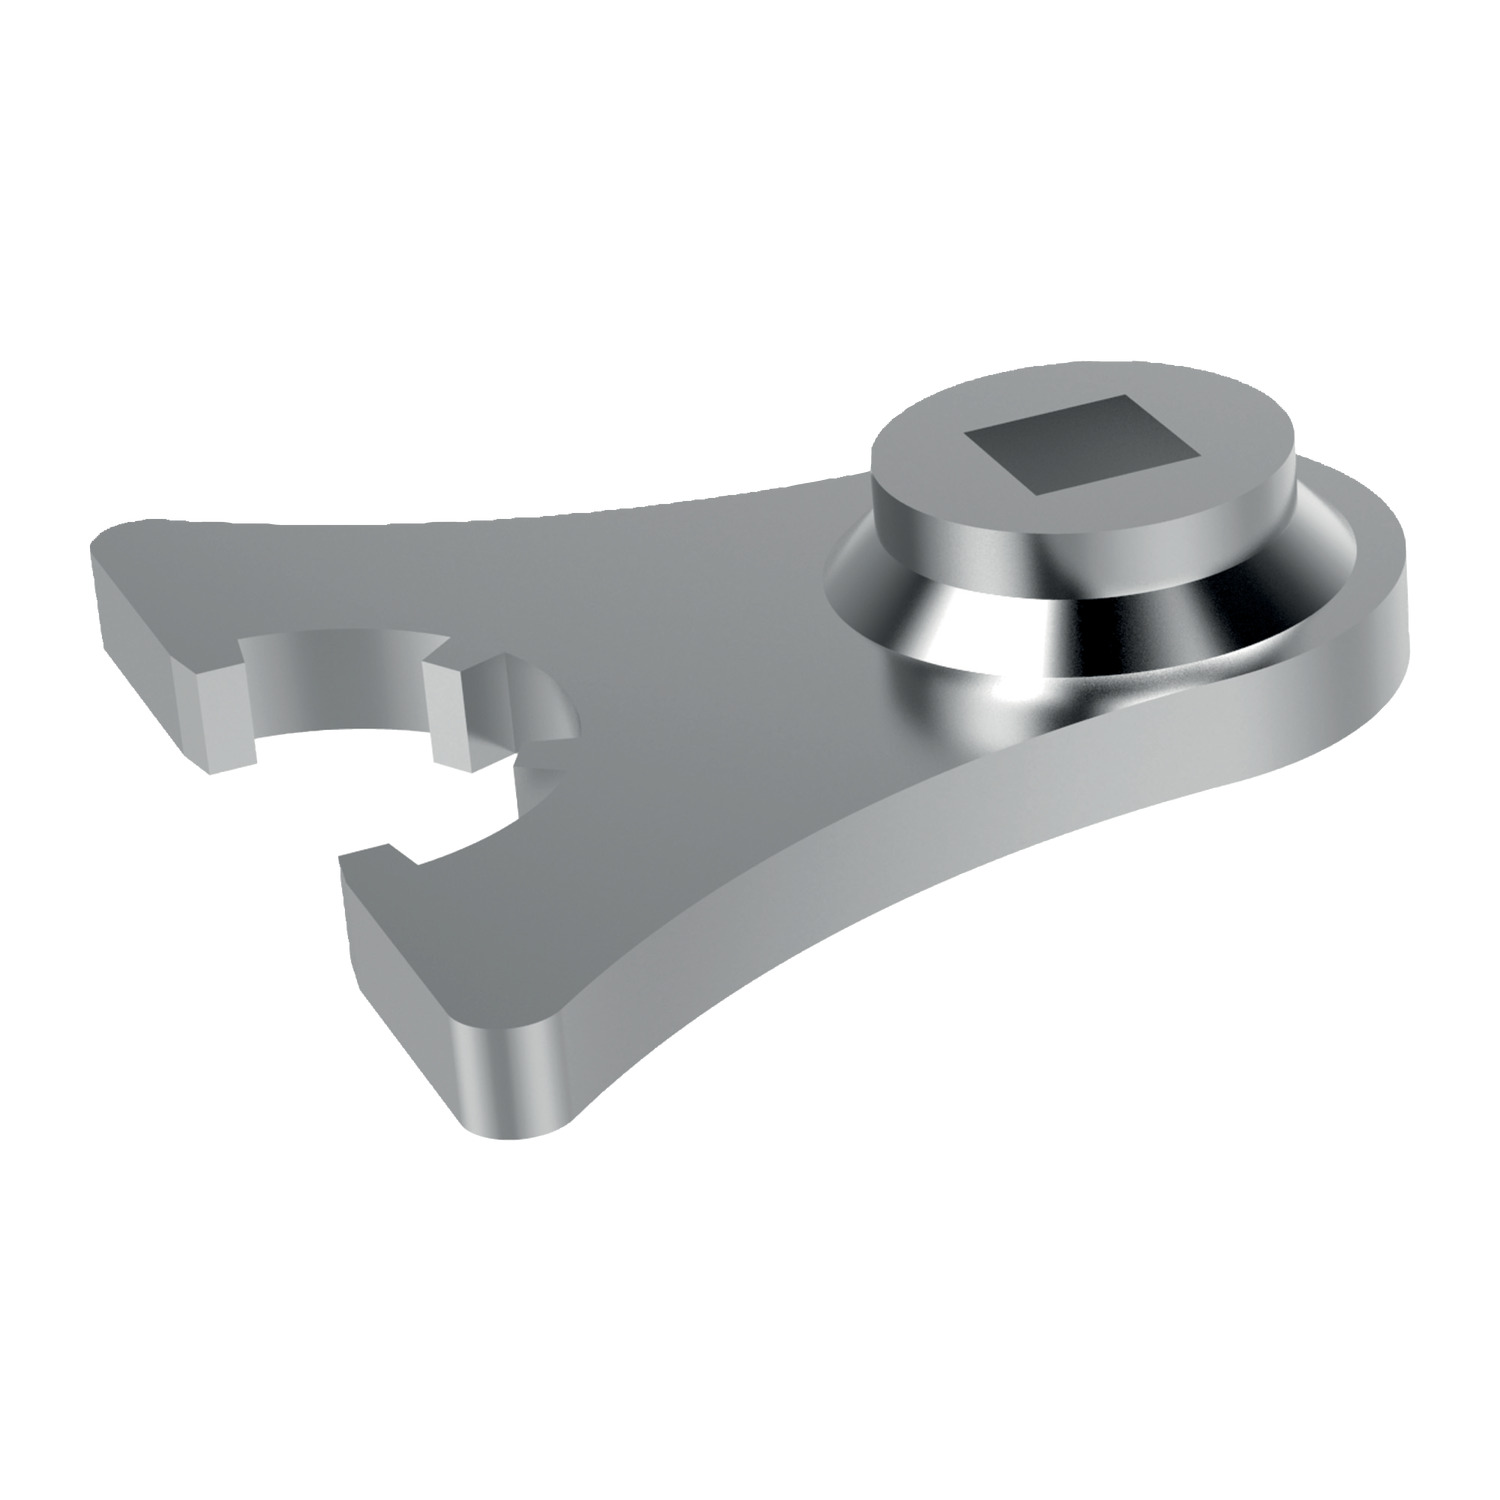 92121.W0032 Key for collet chuck - torque wrench for chuck nuts (ER) to DIN 6499.  Drive 1/2" square socket with ball-engagement groove.  Special steel, hardened and zinc-plated.